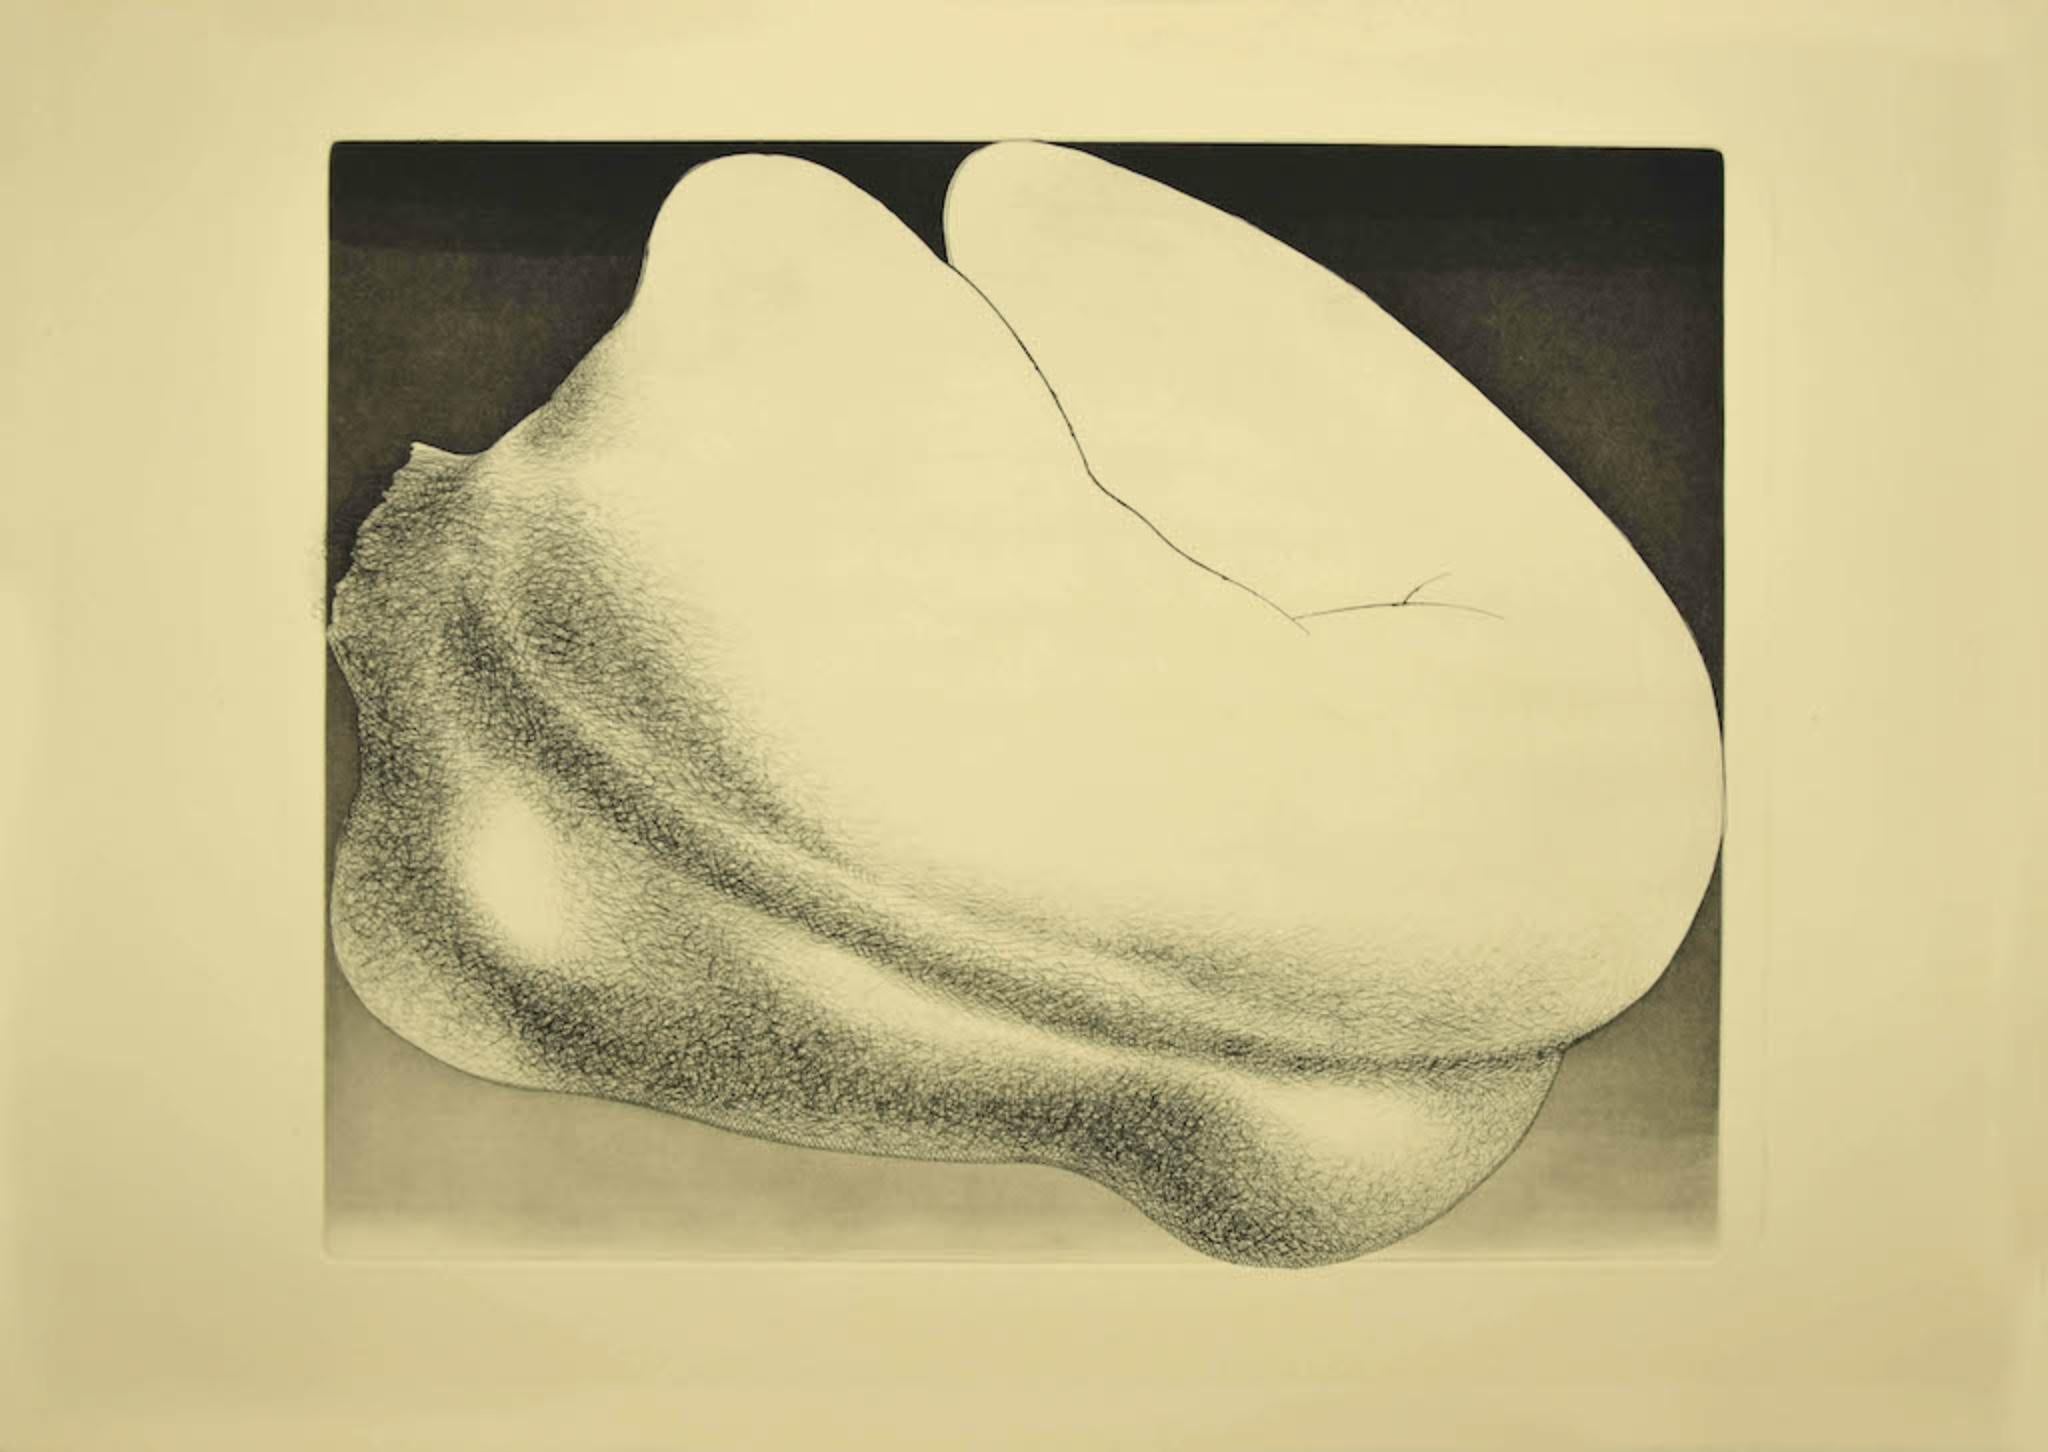 Woman from Shoulders is an etching on paper, realized by the Italian artist Giacomo Porzano (1925-2006).

In good condition.  Image Dimensions: 40 x 50 cm.

This contemporary piece representing the back of a nude woman, with strong lines and intense